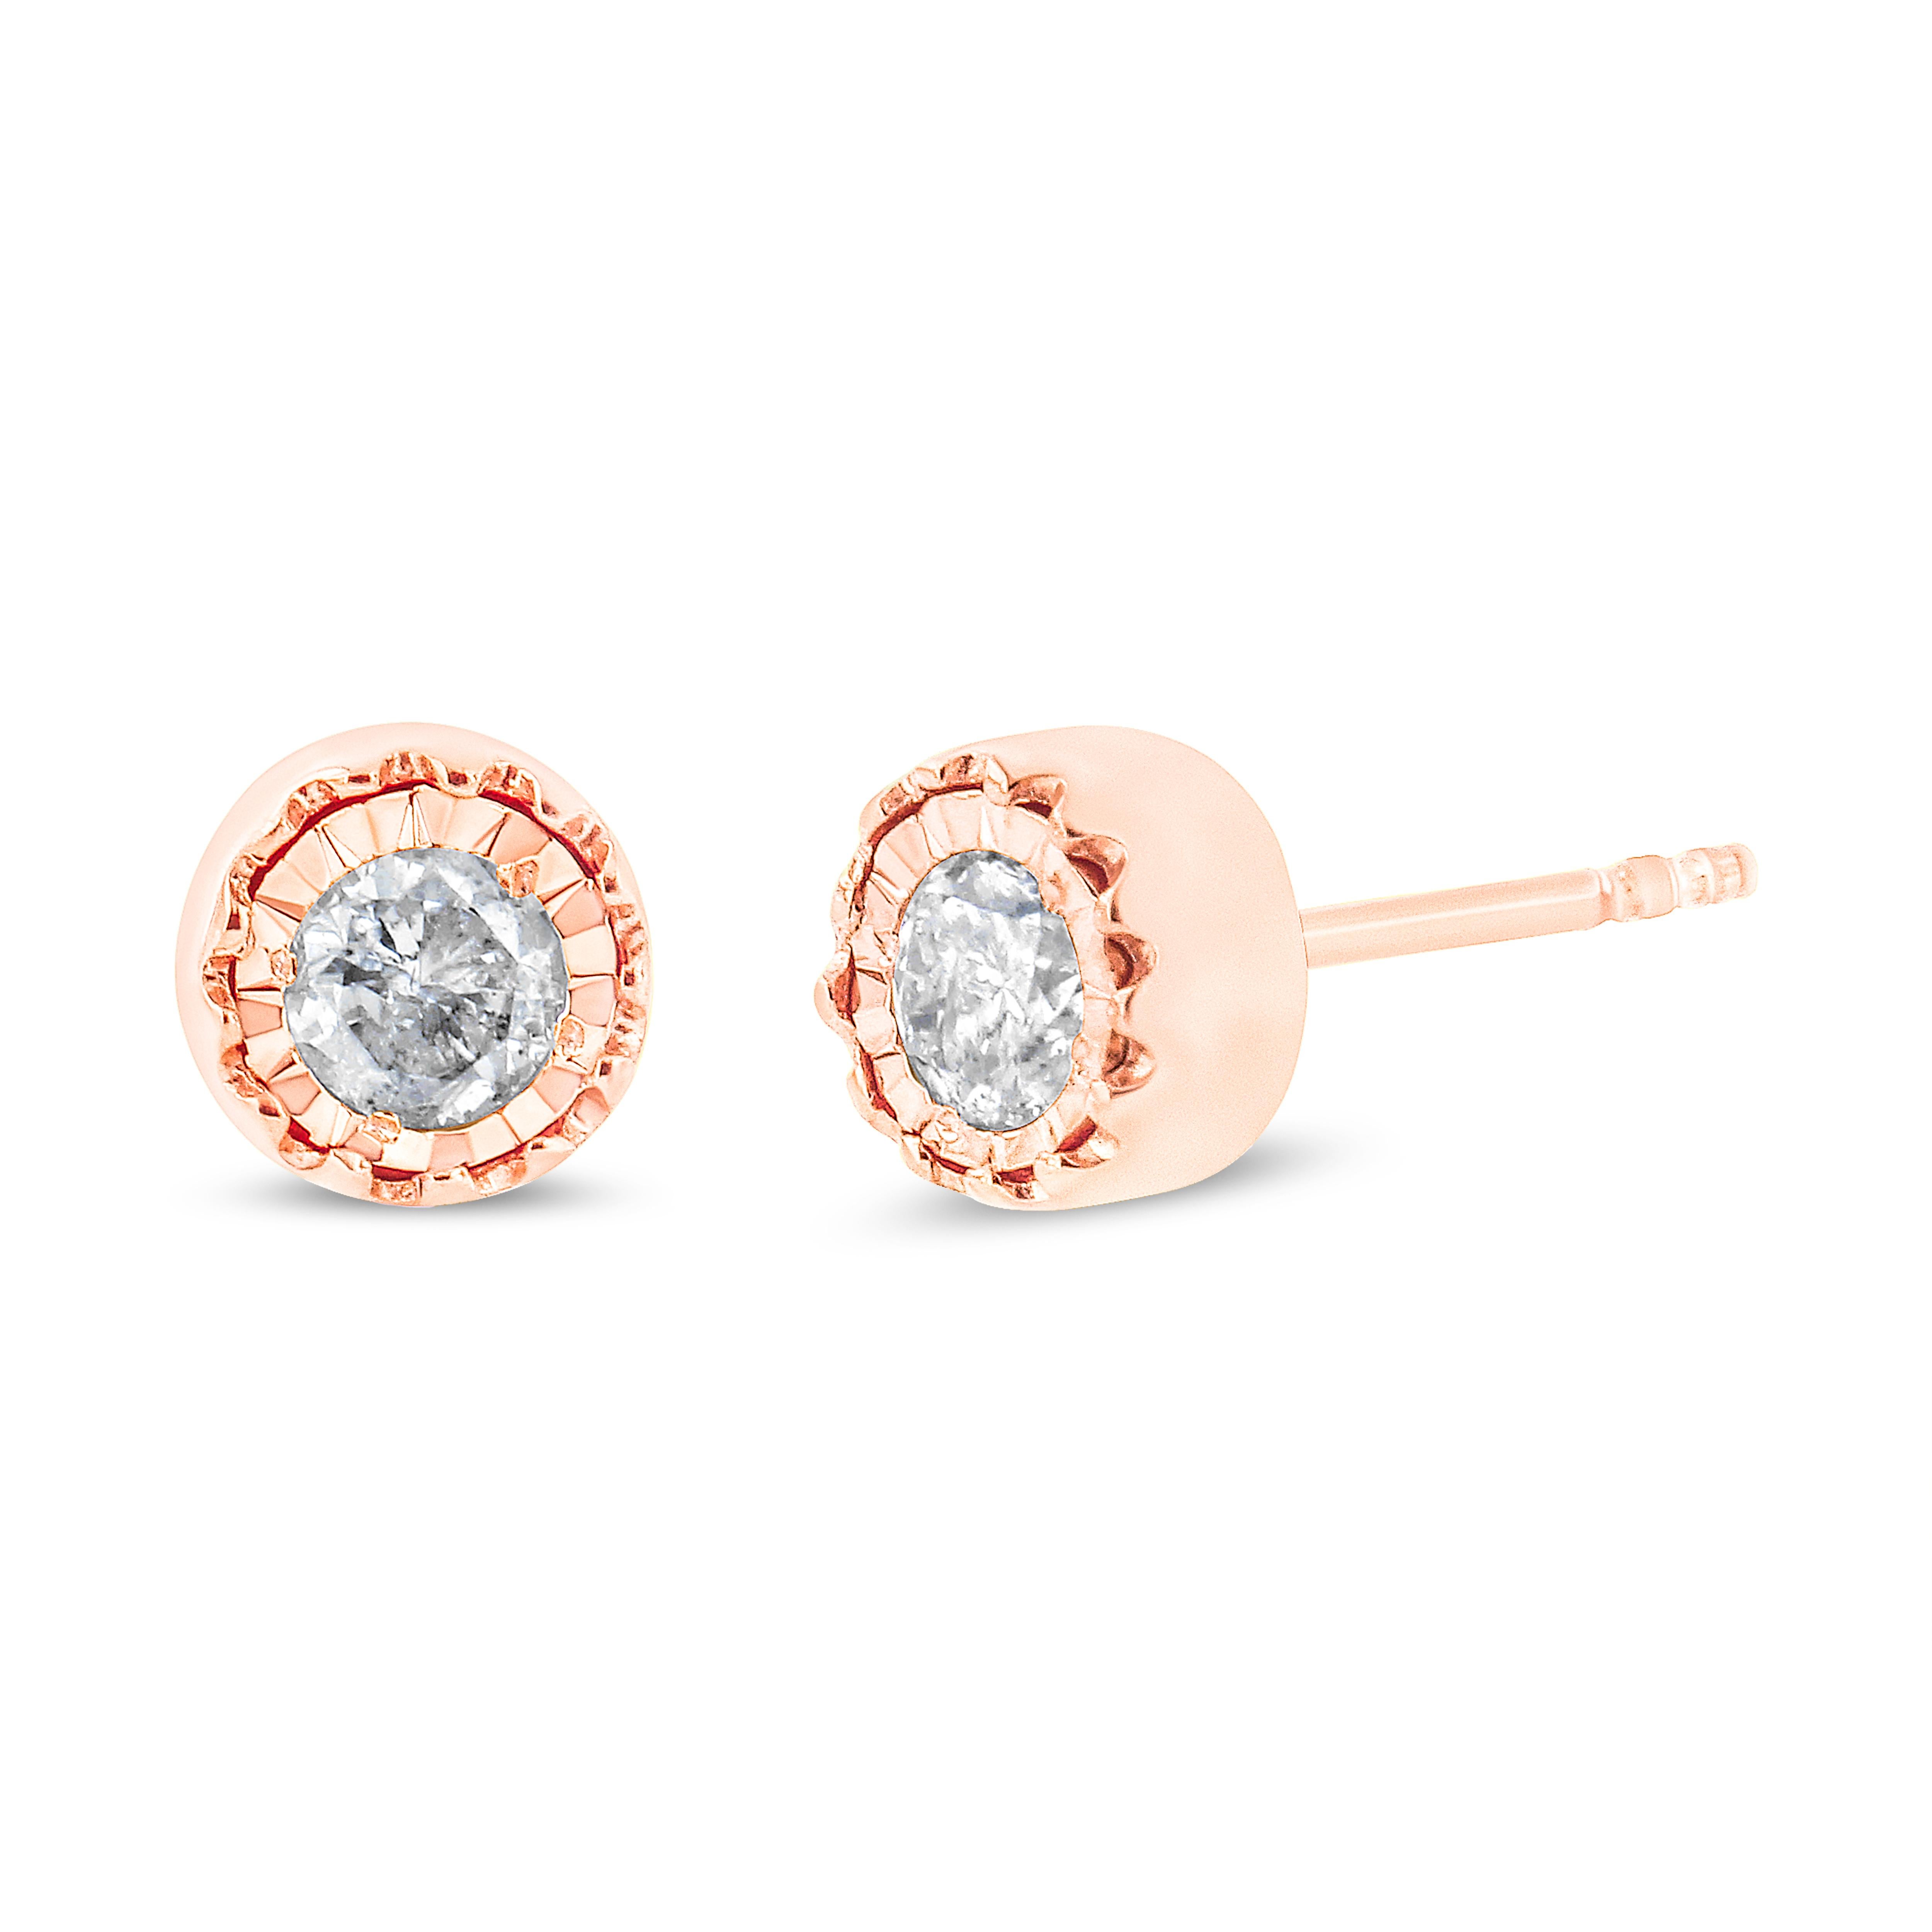 Look effortlessly chic and sophisticated for any occasion when you walk into a room wearing these stunning solitaire diamond stud earrings. Immortalized in fine 10K Rose Gold Flashed .925 sterling silver, this pair presents a gorgeous sparkle with